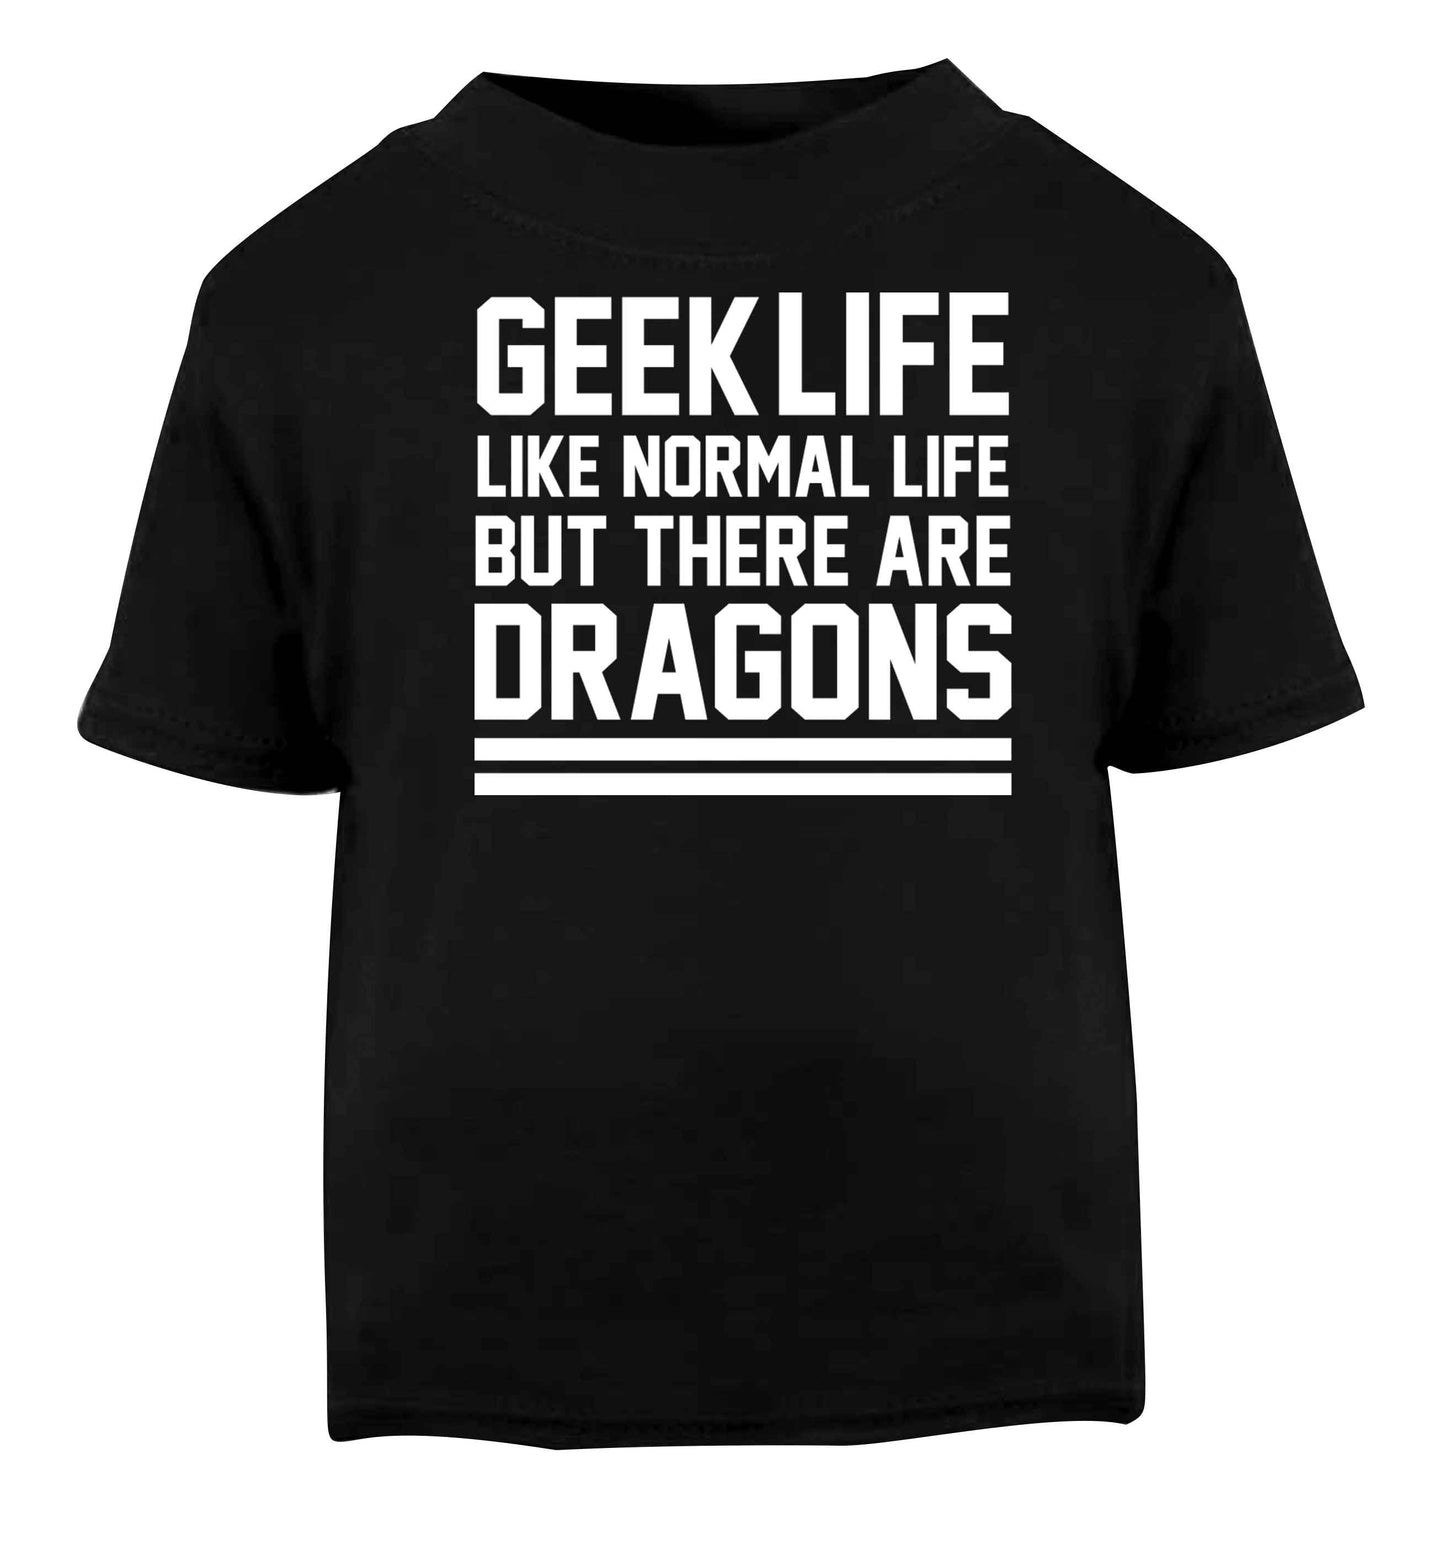 Geek life like normal life but there are dragons Black baby toddler Tshirt 2 years